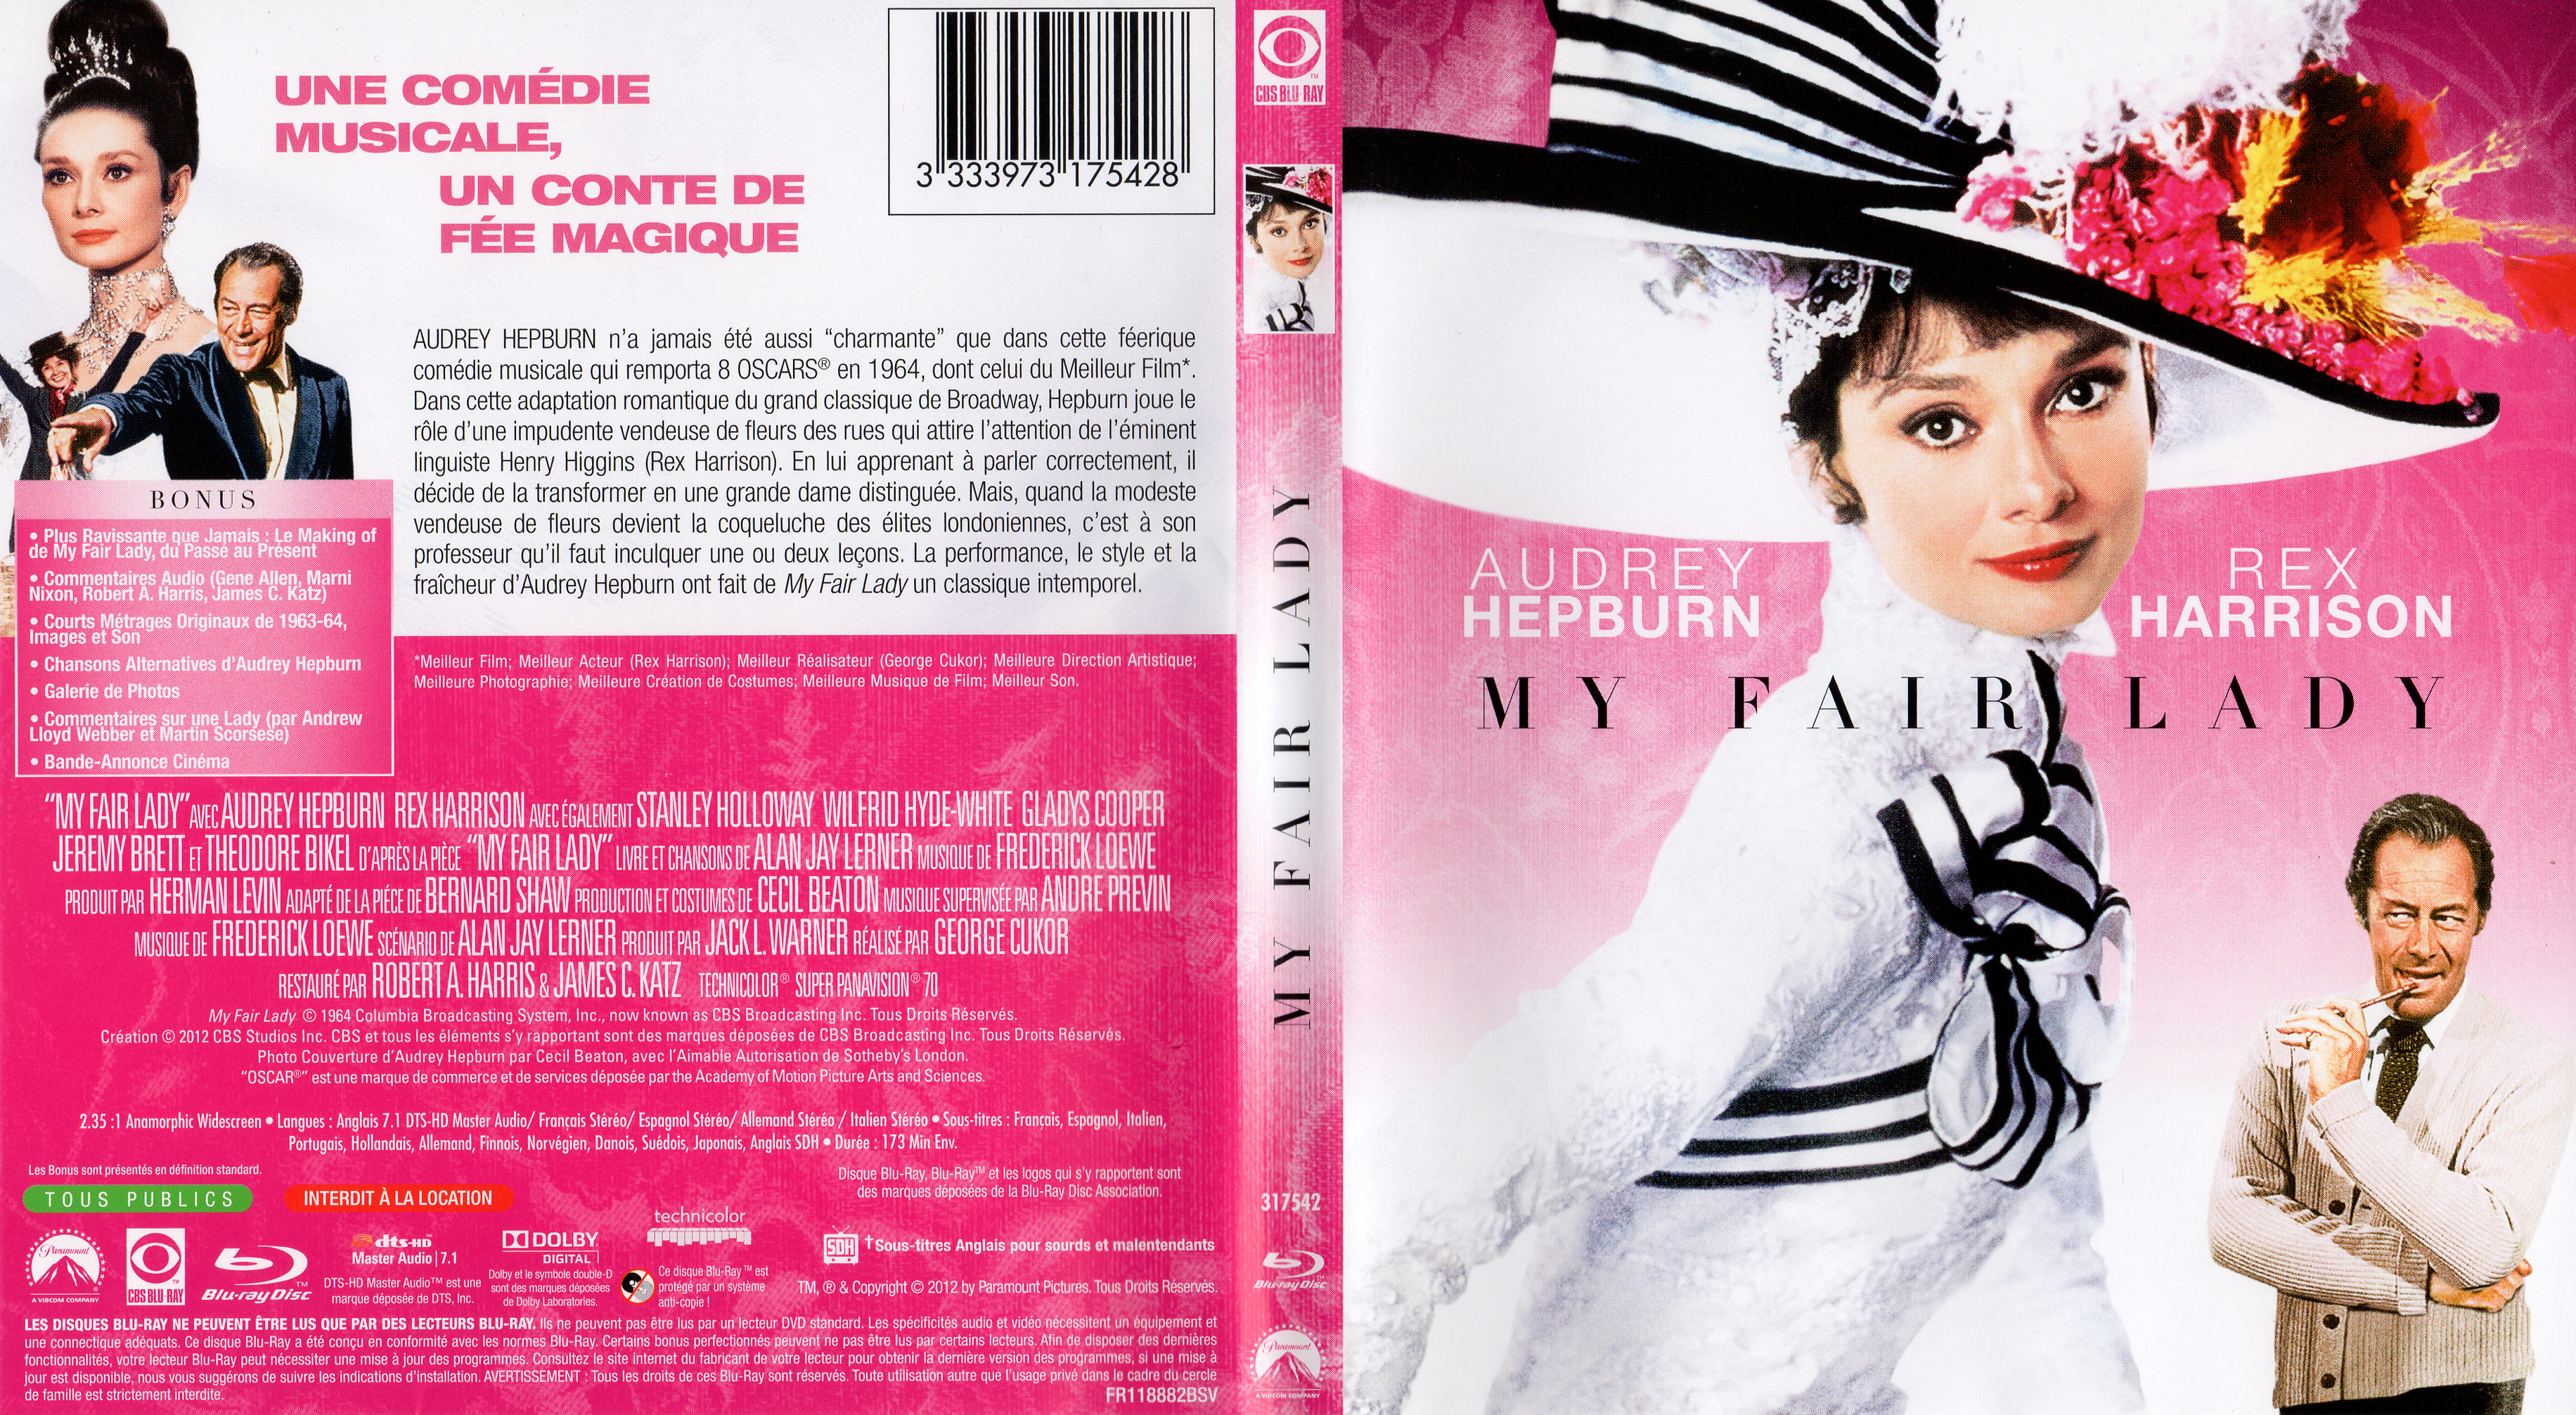 Jaquette DVD My fair lady (BLU-RAY)